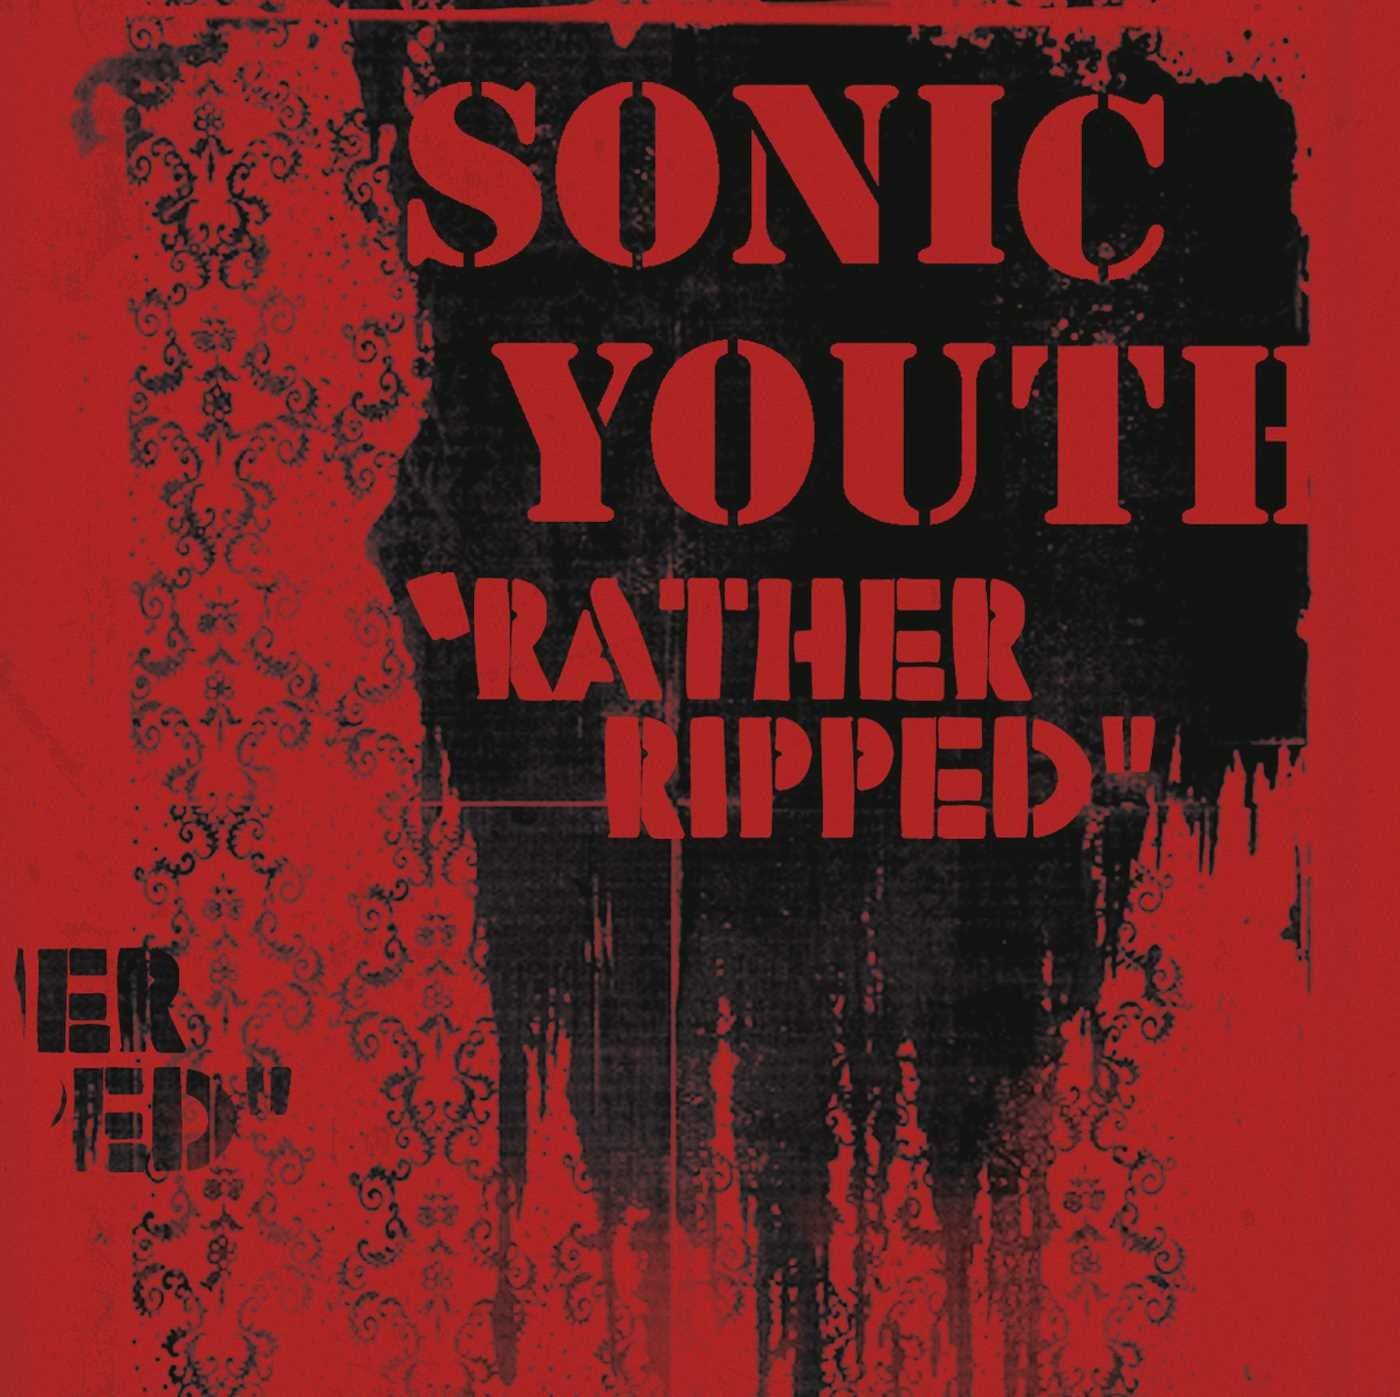 Sonic Youth Rather Ripped - Ireland Vinyl